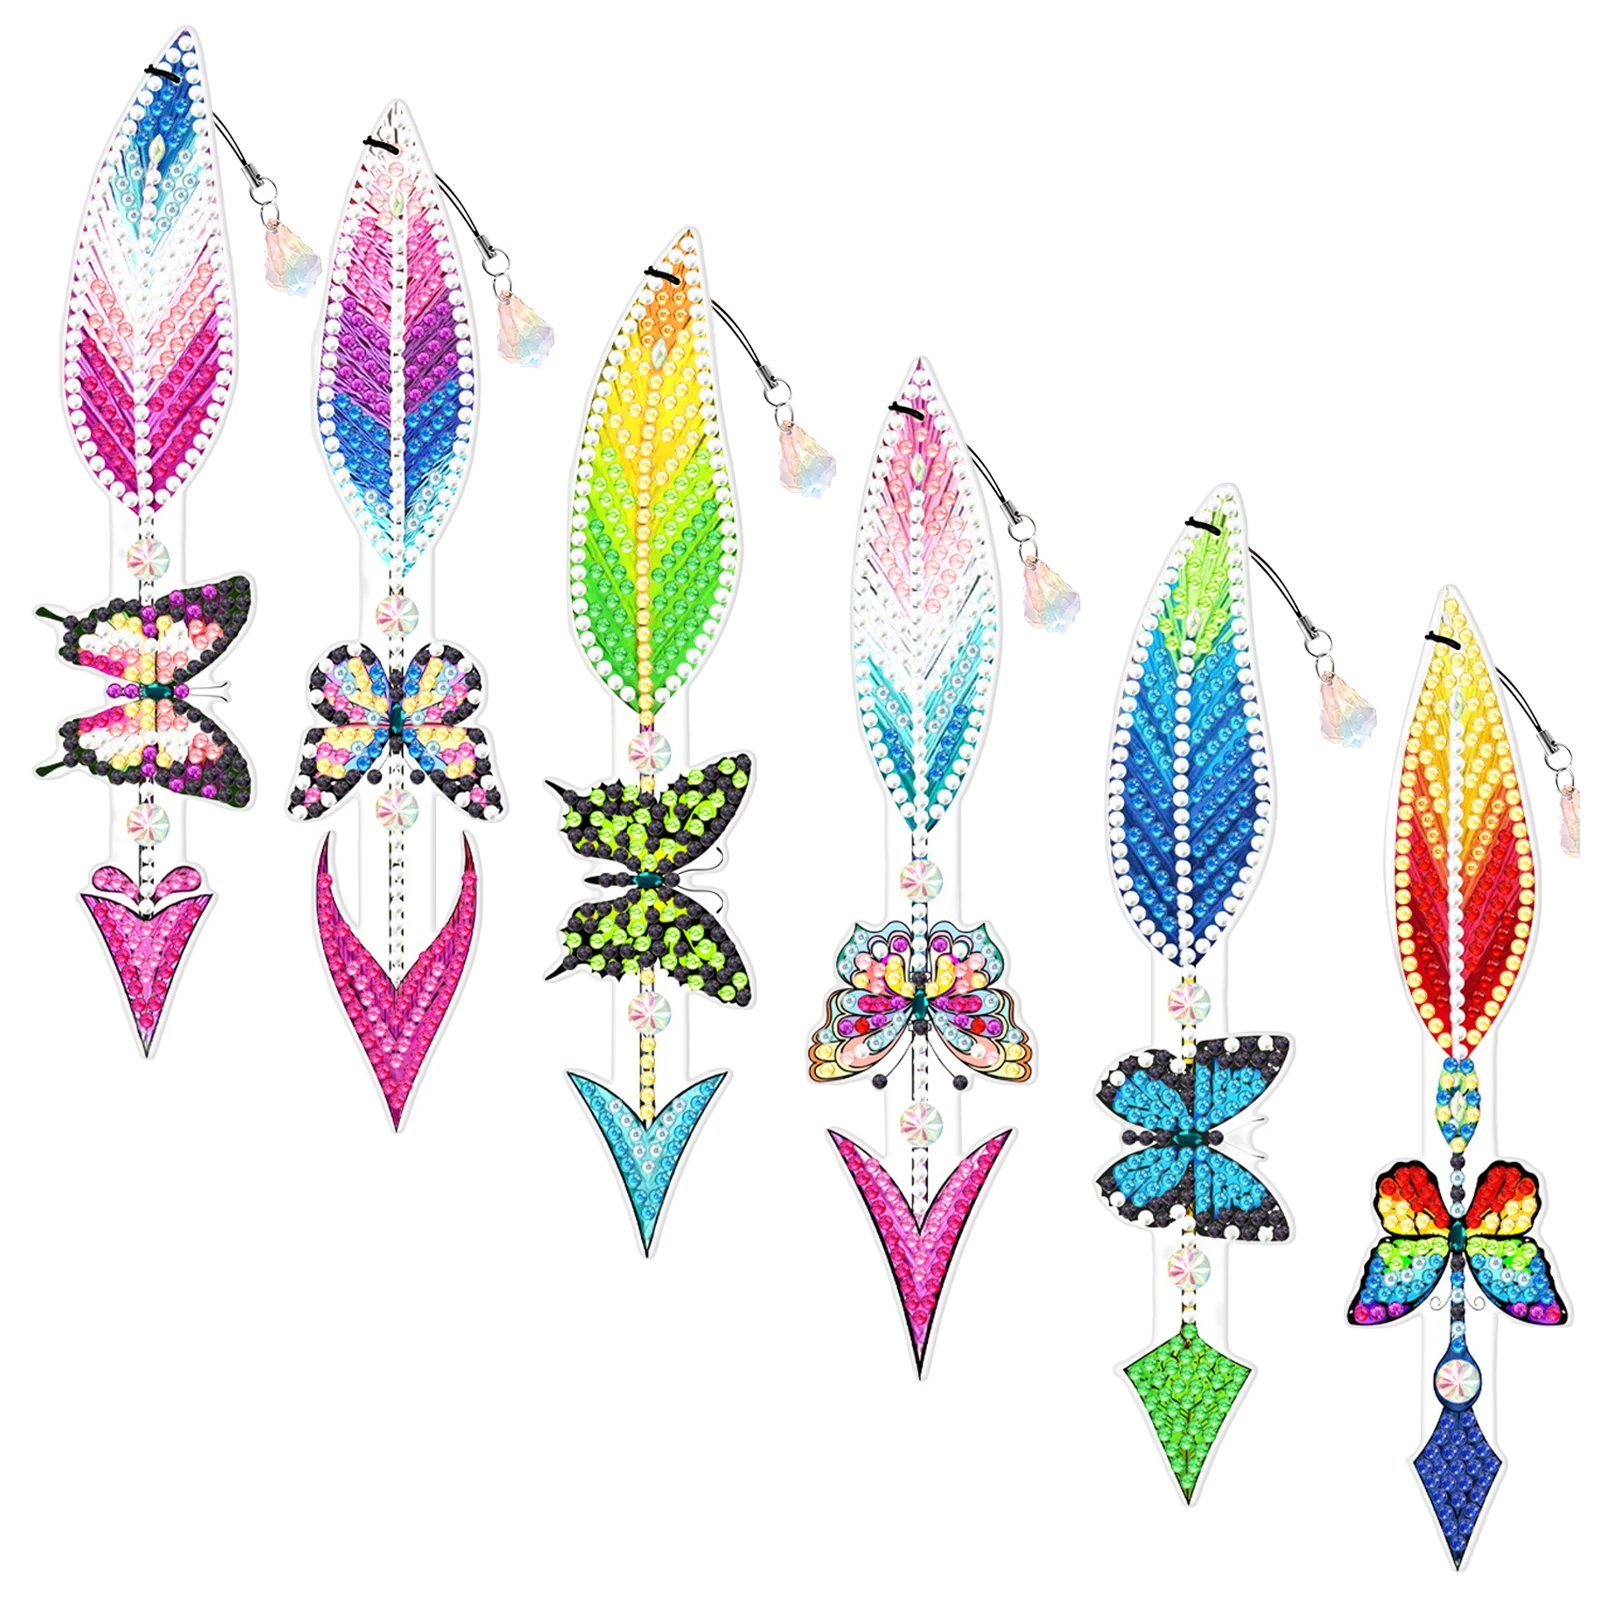 

6 Pcs 5D Delicate Feather Good Toughness Full Drill Crystal No Deformation For Art Crafts DIY Stylish Students Diamond Bookmarks